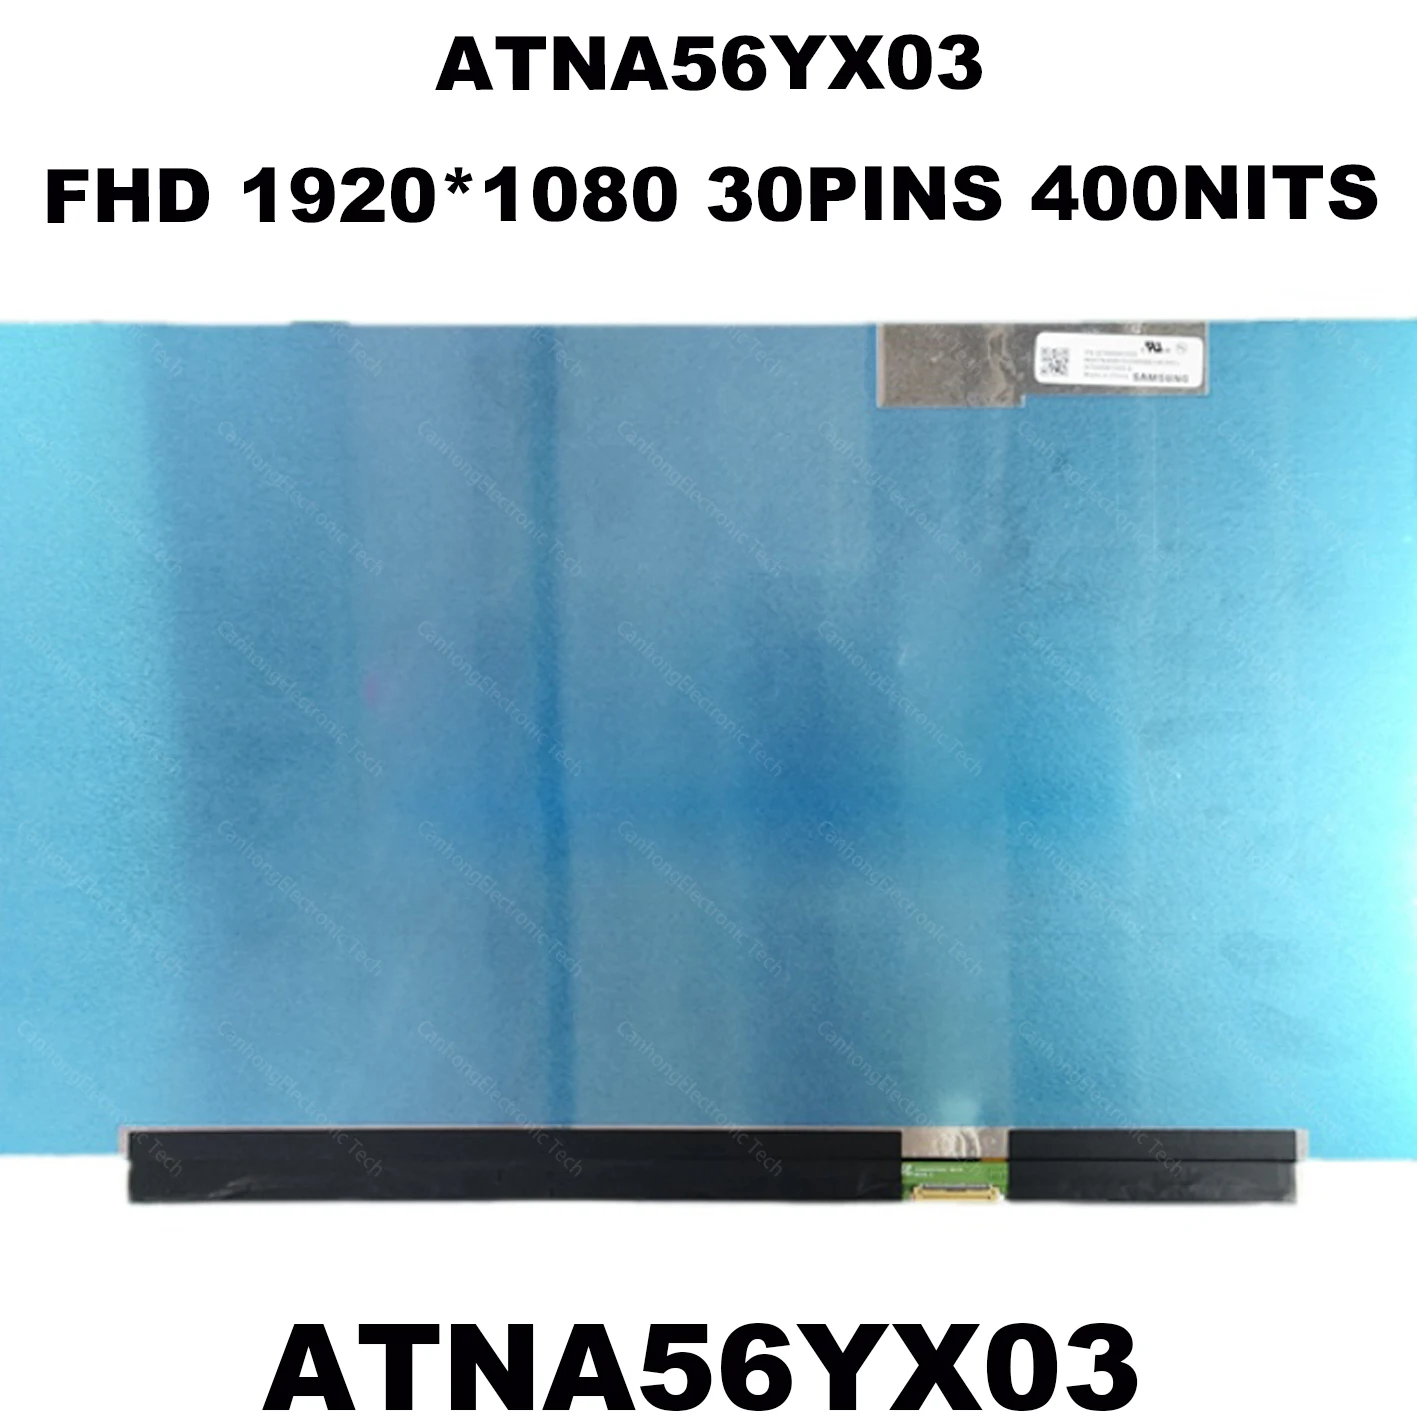 15.6“ ATNA56YX03 OLED AM-OLED 100% DCI-P3 FHD 1920*1080 IPS EDP LCD Display Panel 30PINS For ASUS Vivobook Pro 15 M3500QC-L1081T